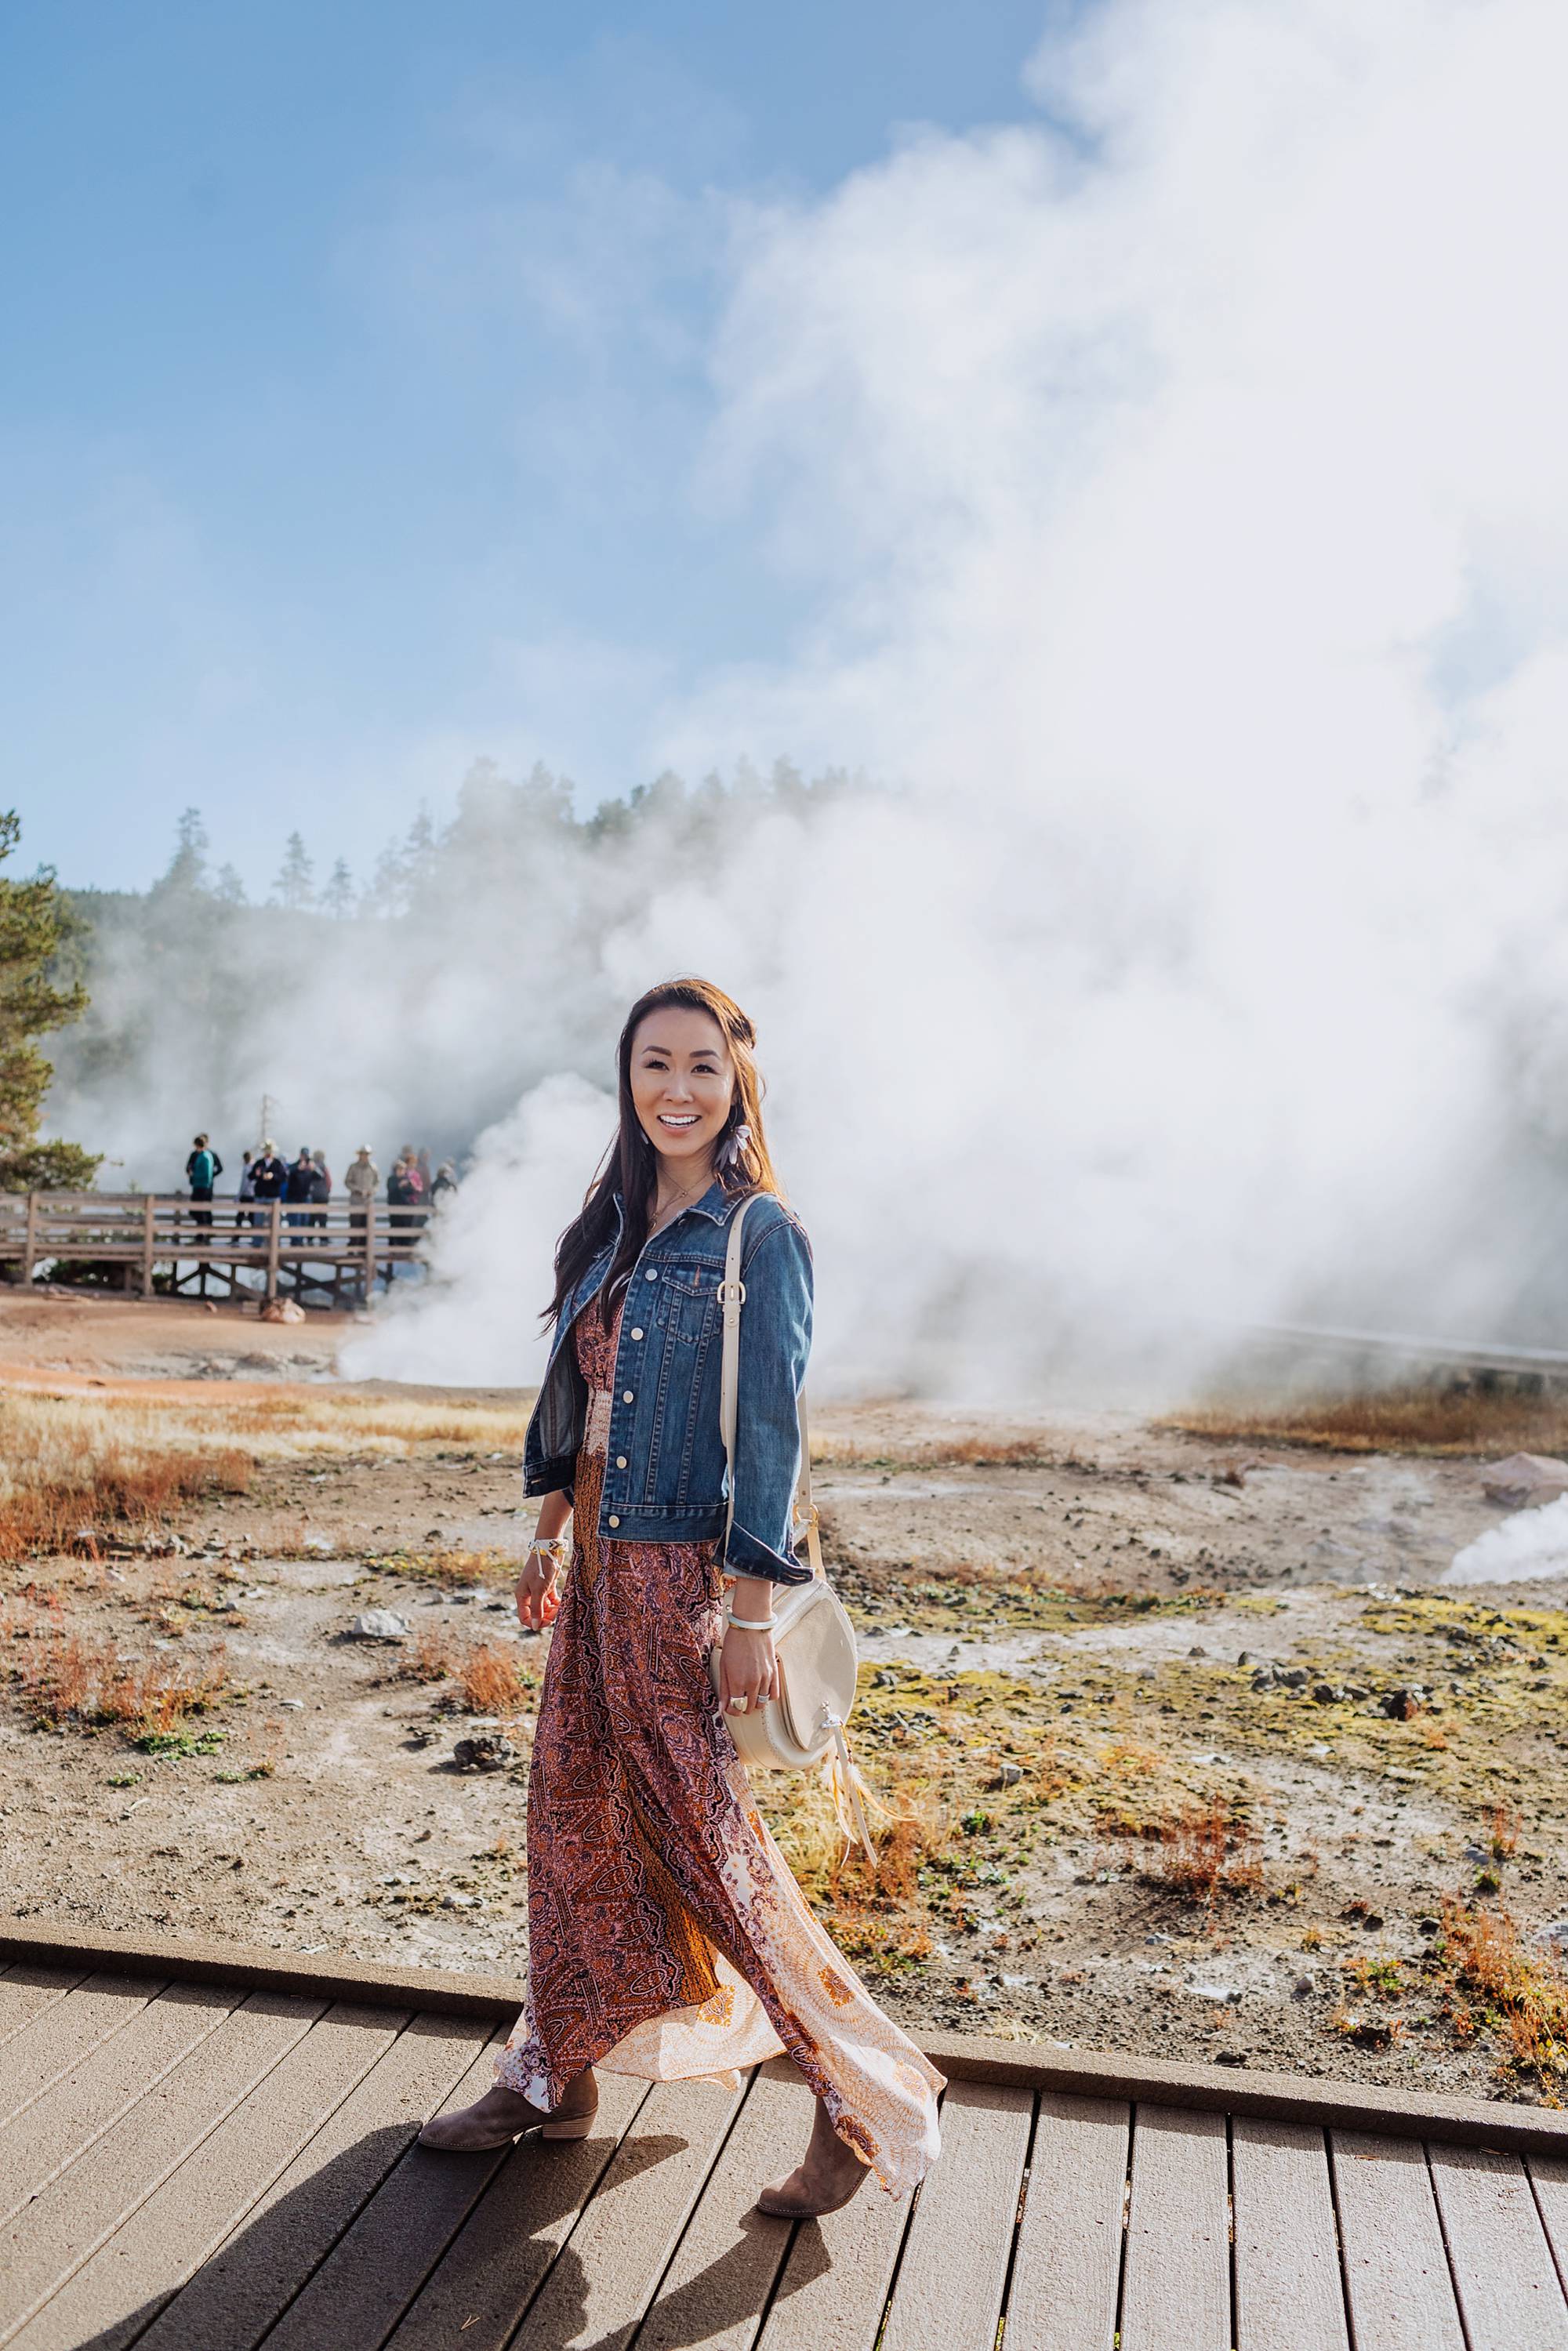 Yellowstone geysers, lifestyle blogger Diana Elizabeth in free people dress from Macy's and lucky brand booties wearing denim jacket. travel fashion inspiration post